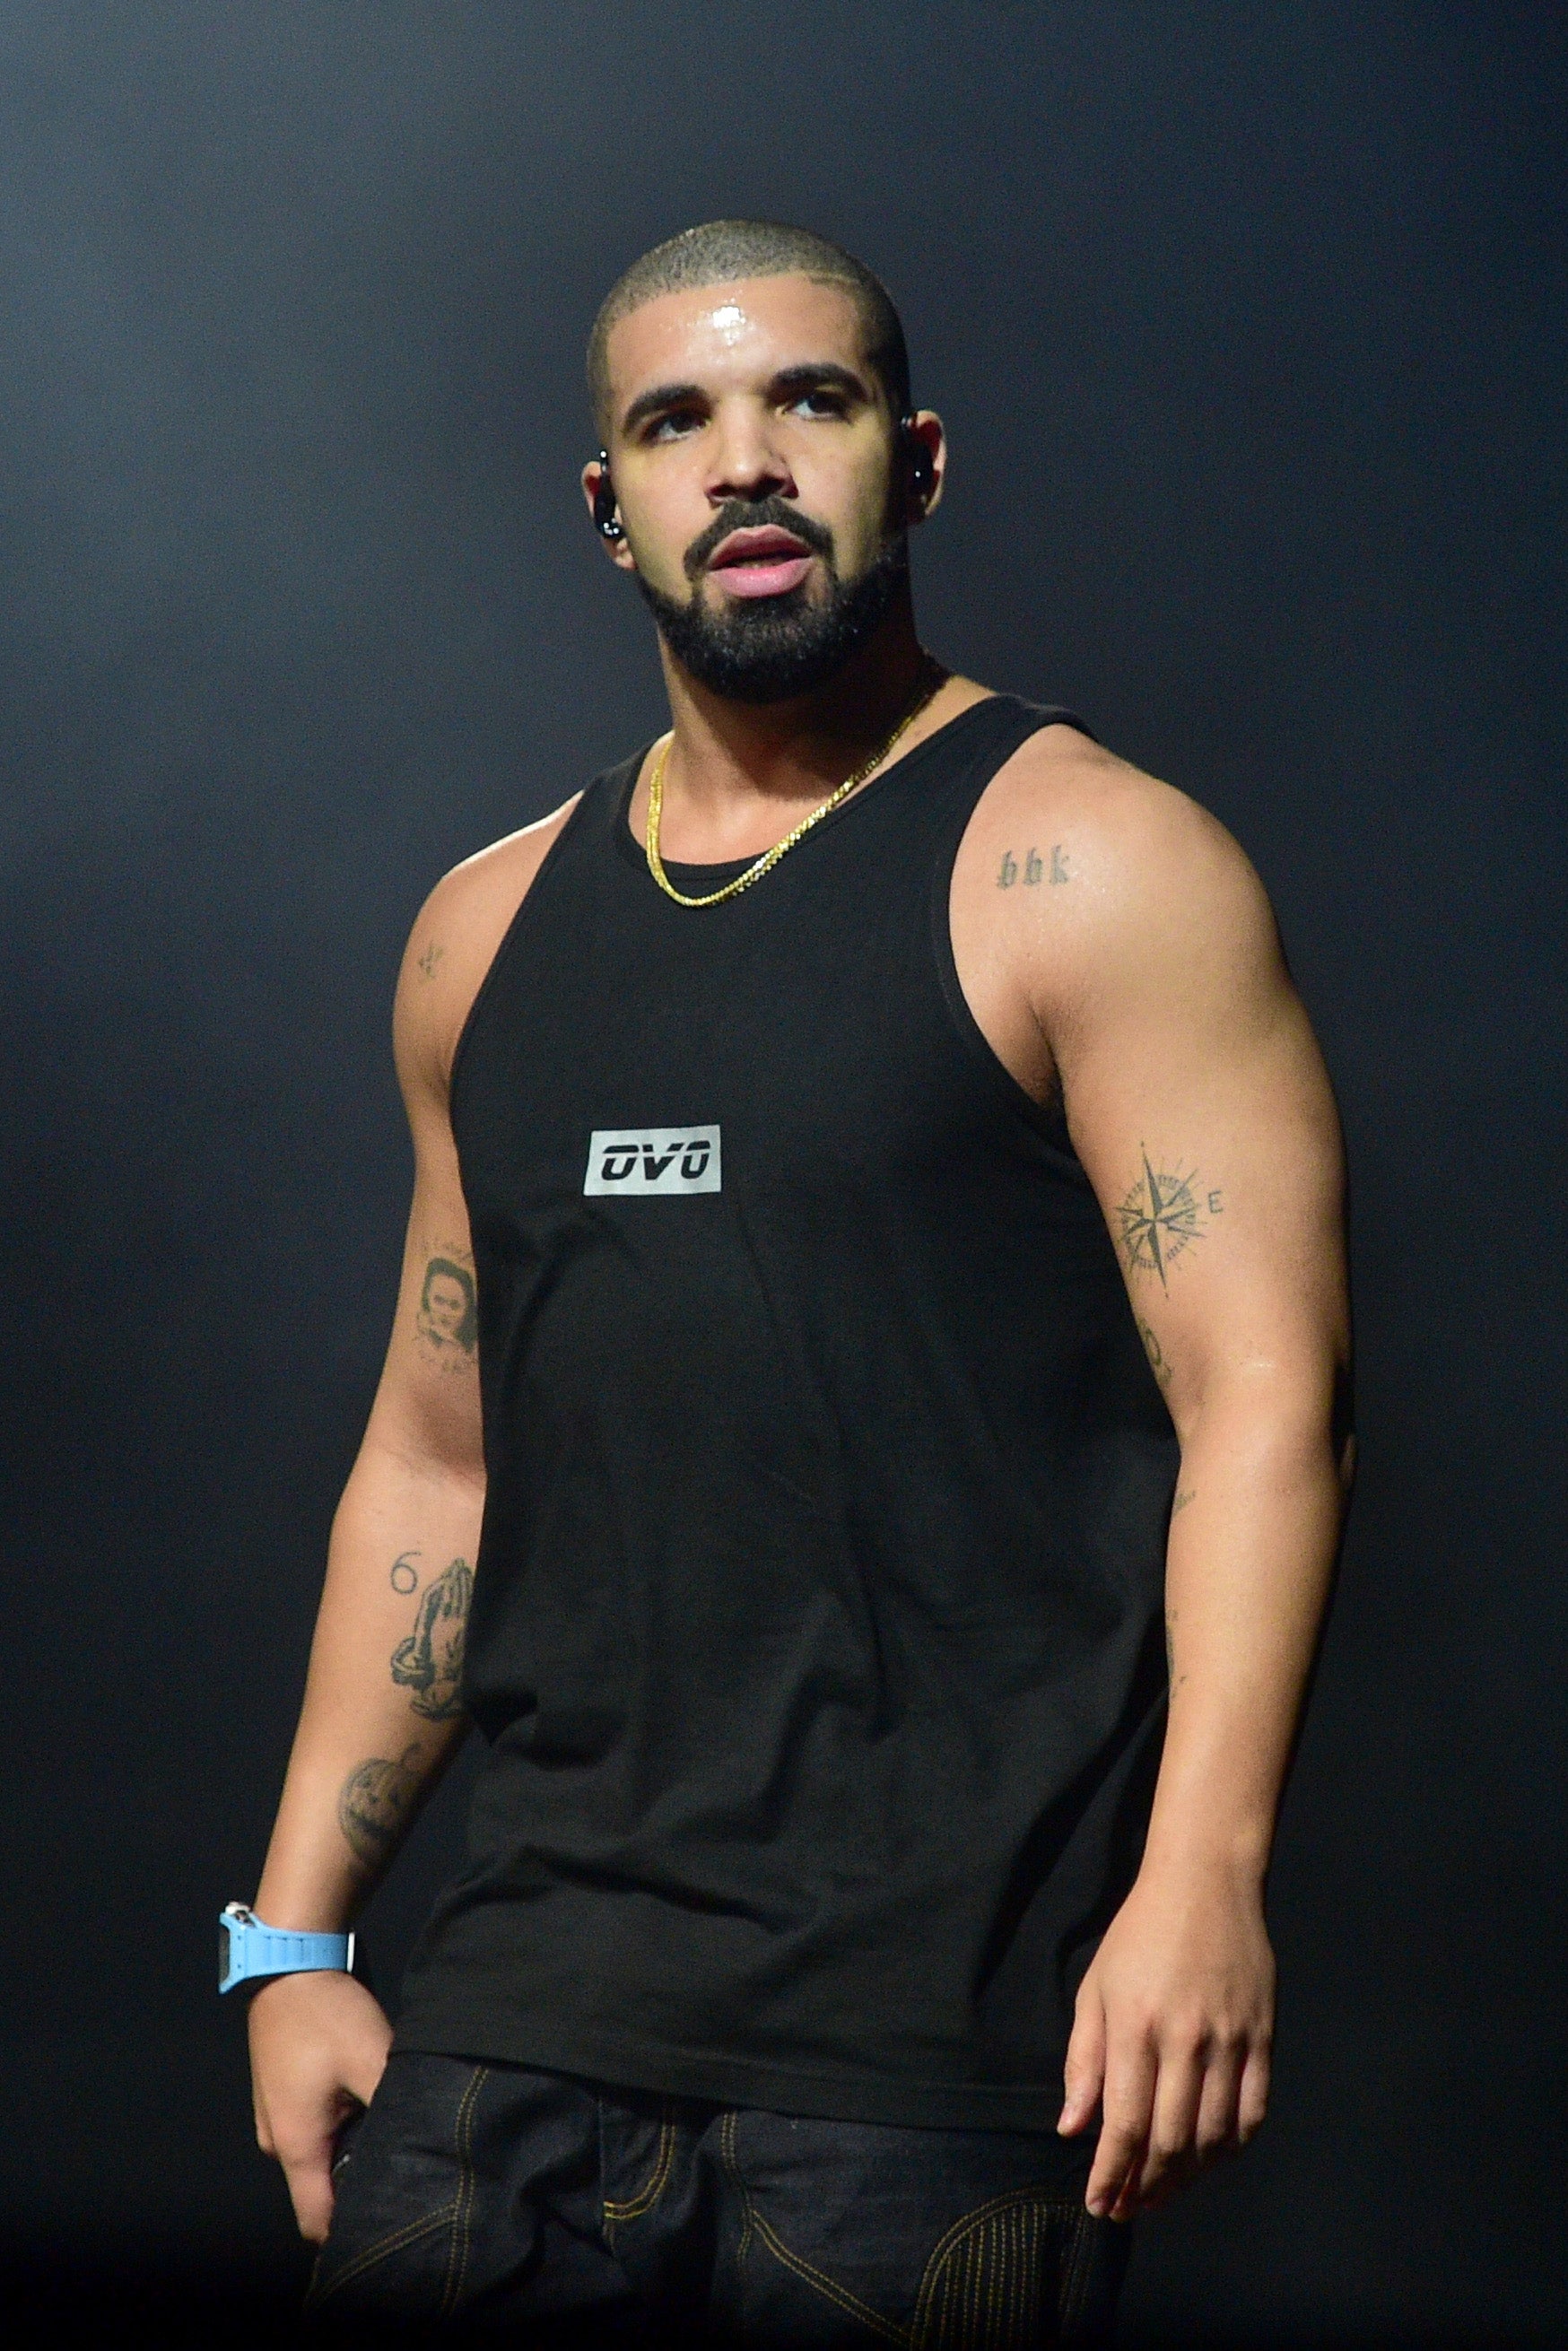 Drake Adds Denzel Washington To His Celebrity Tattoo Collection
